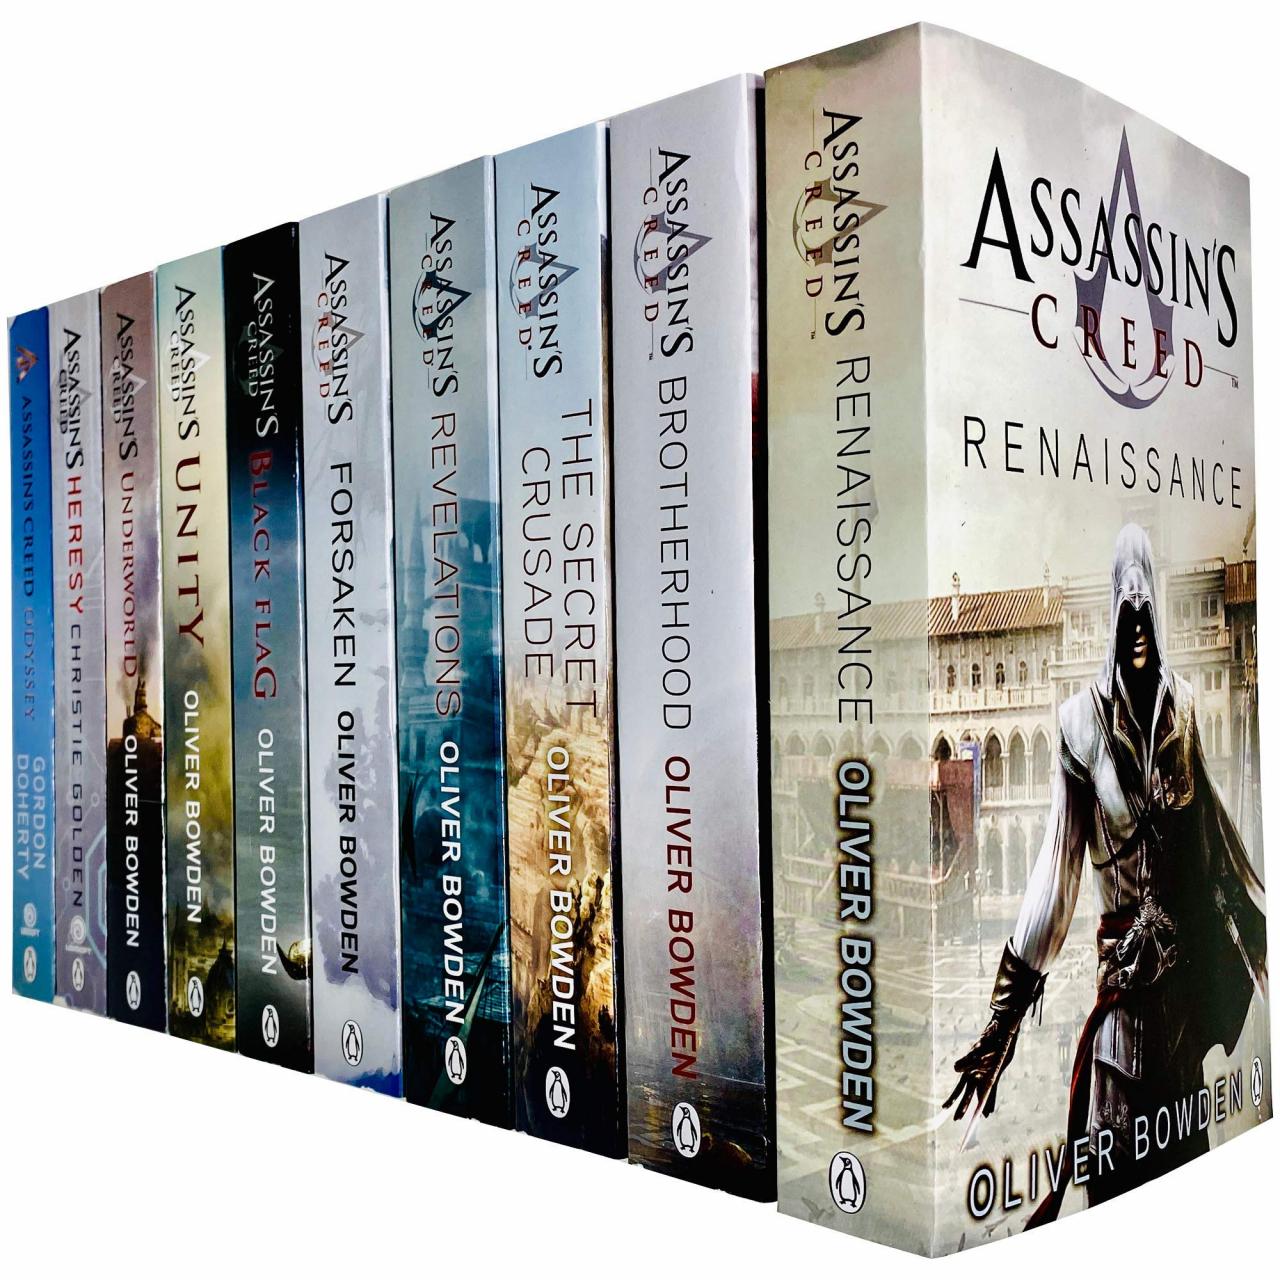 An assassin's creed series books